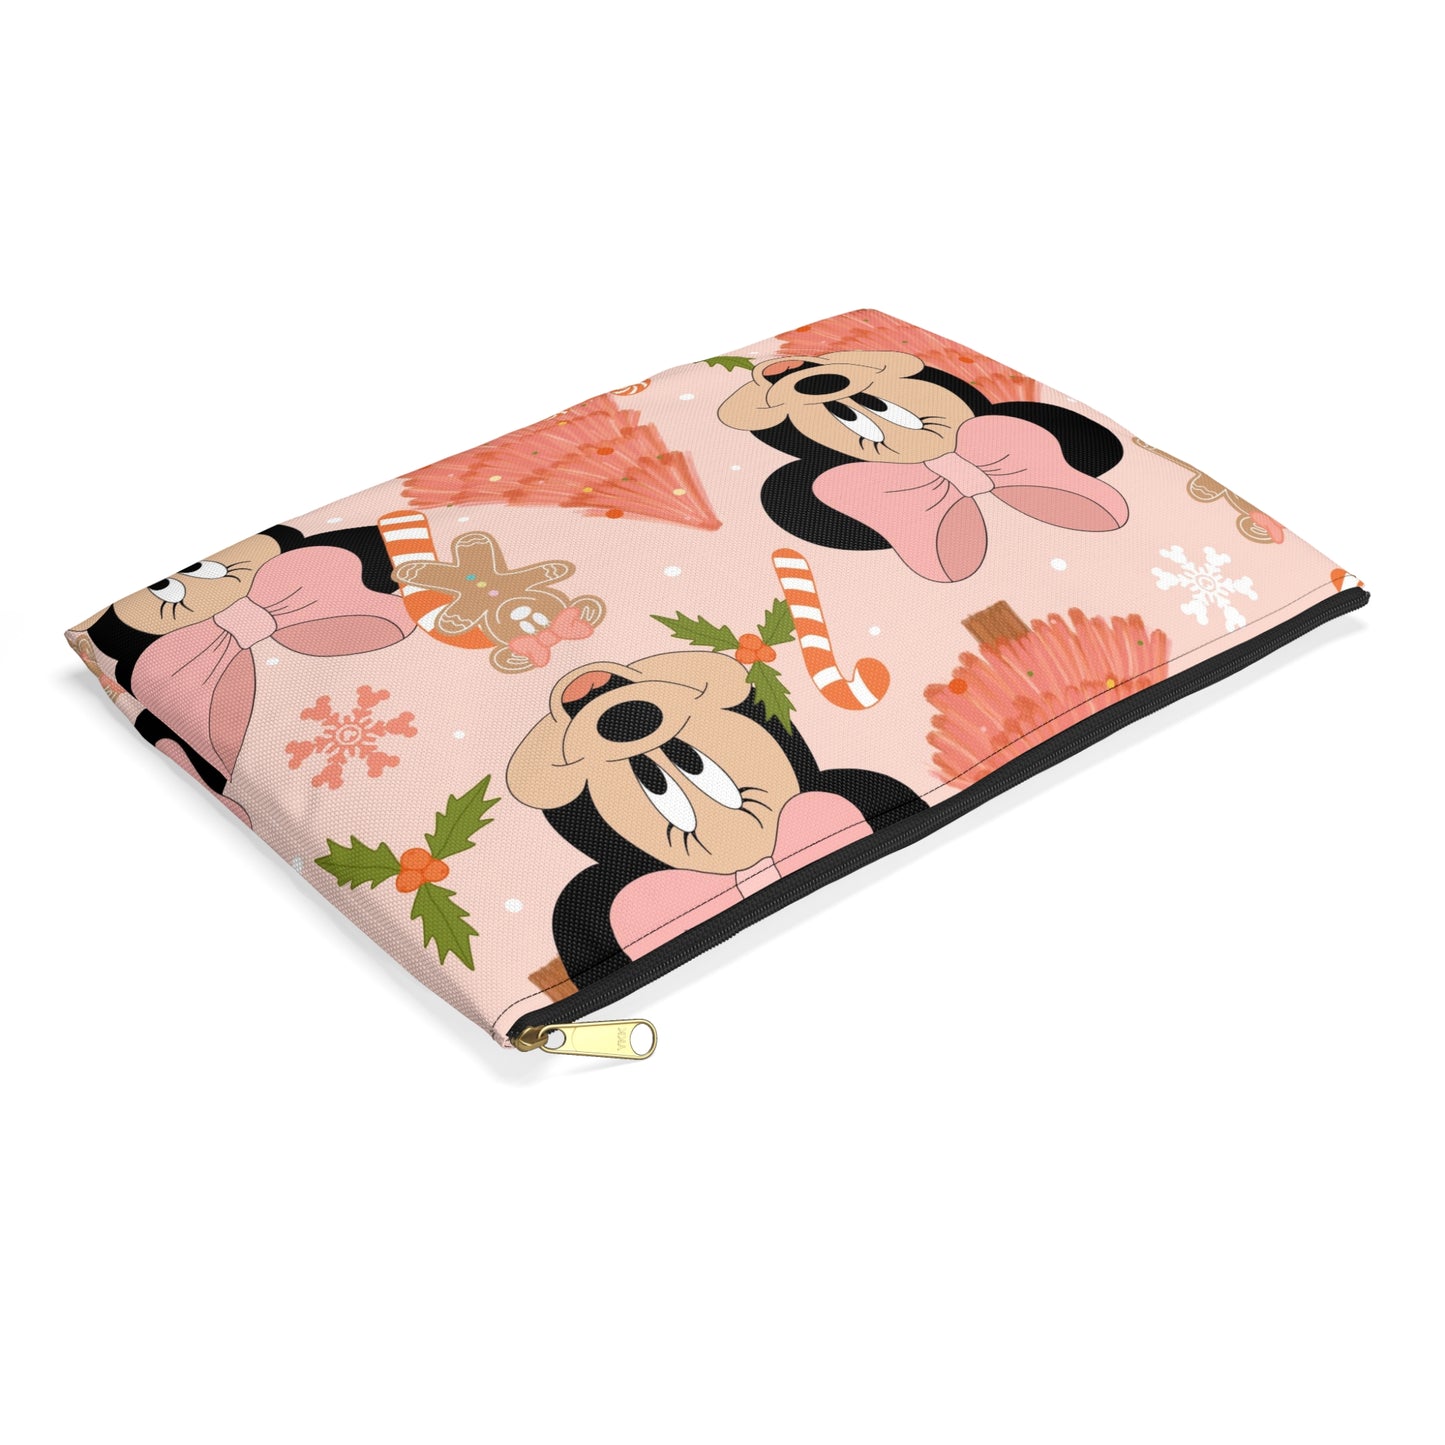 Merry Minnie Christmas Accessory Pouch